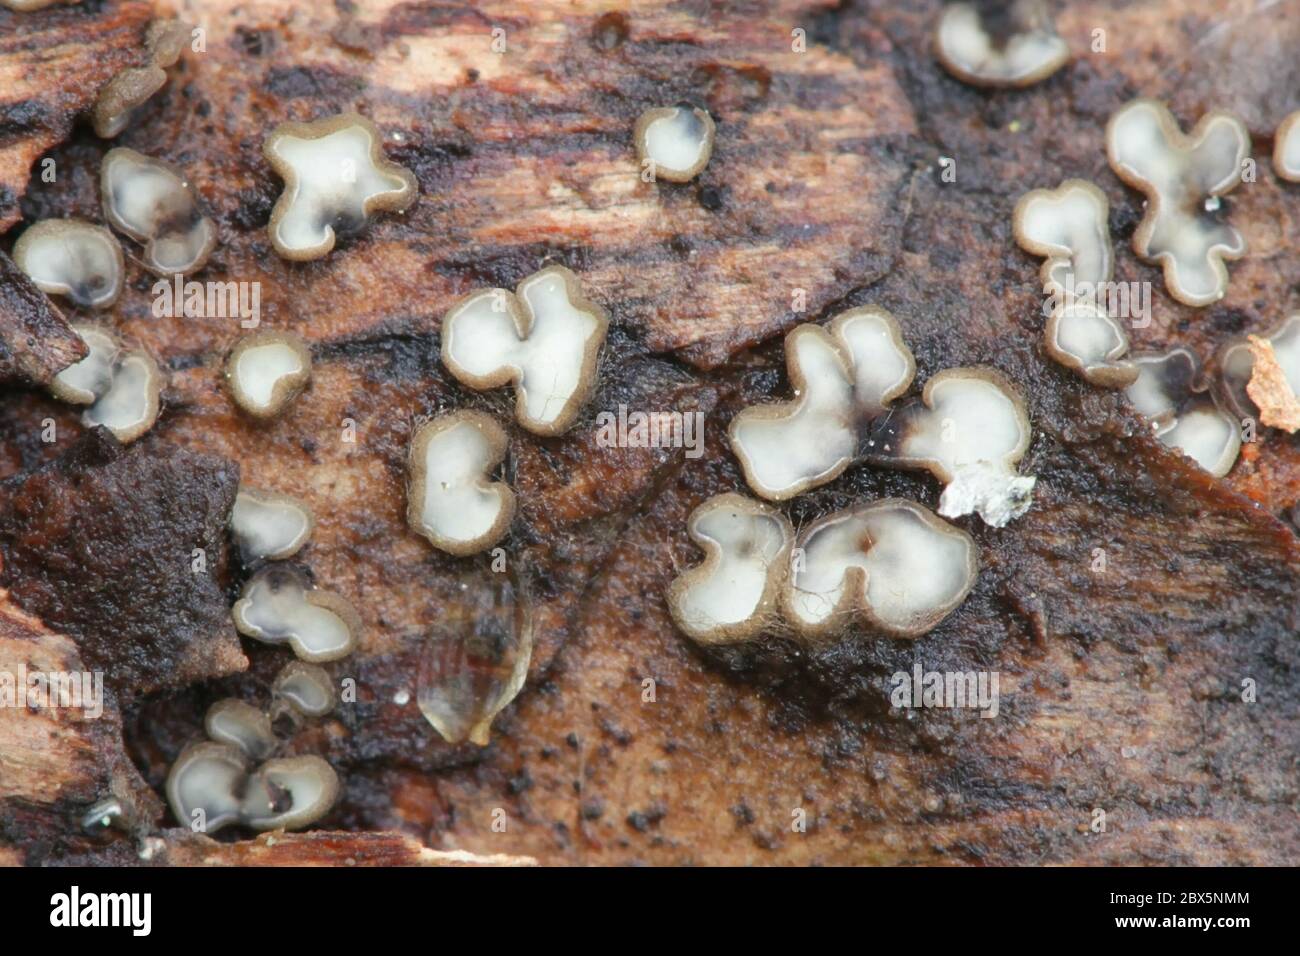 Mollisia sp growing on spruce cone, a discomycete fungus from Finland with no common english name Stock Photo